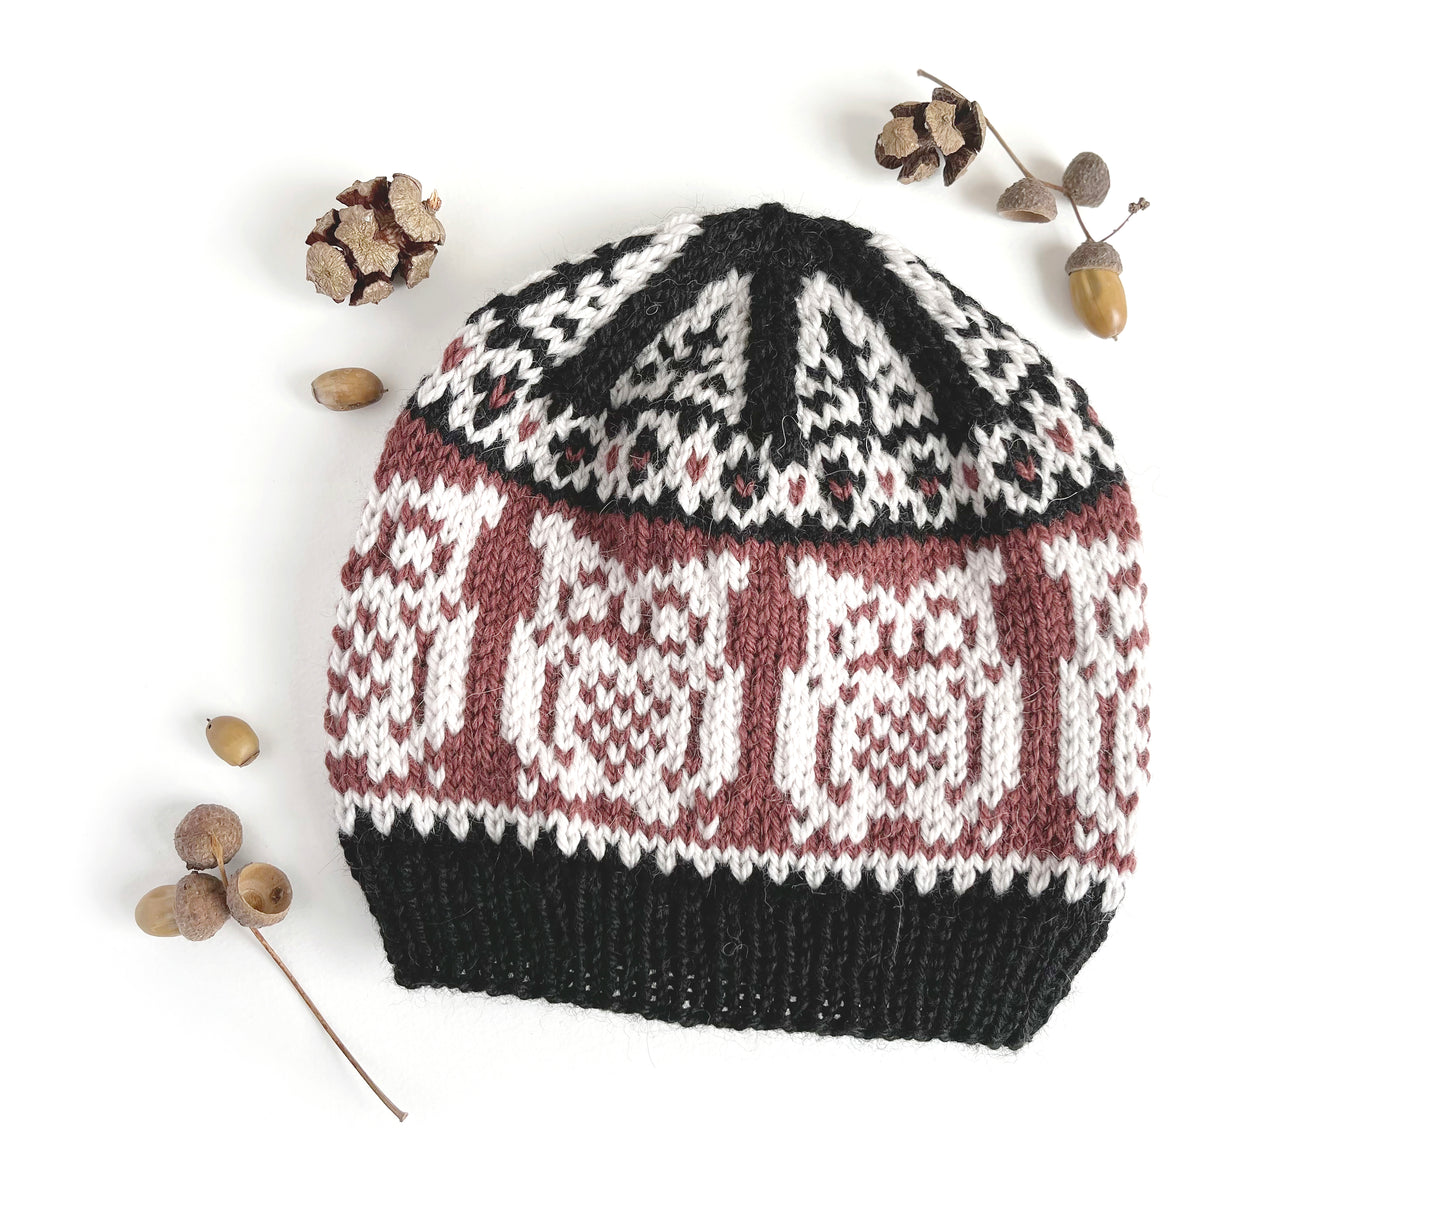 black, brown and white wool hand-knitted Fair Isle beanie hat in Owl knitting pattern